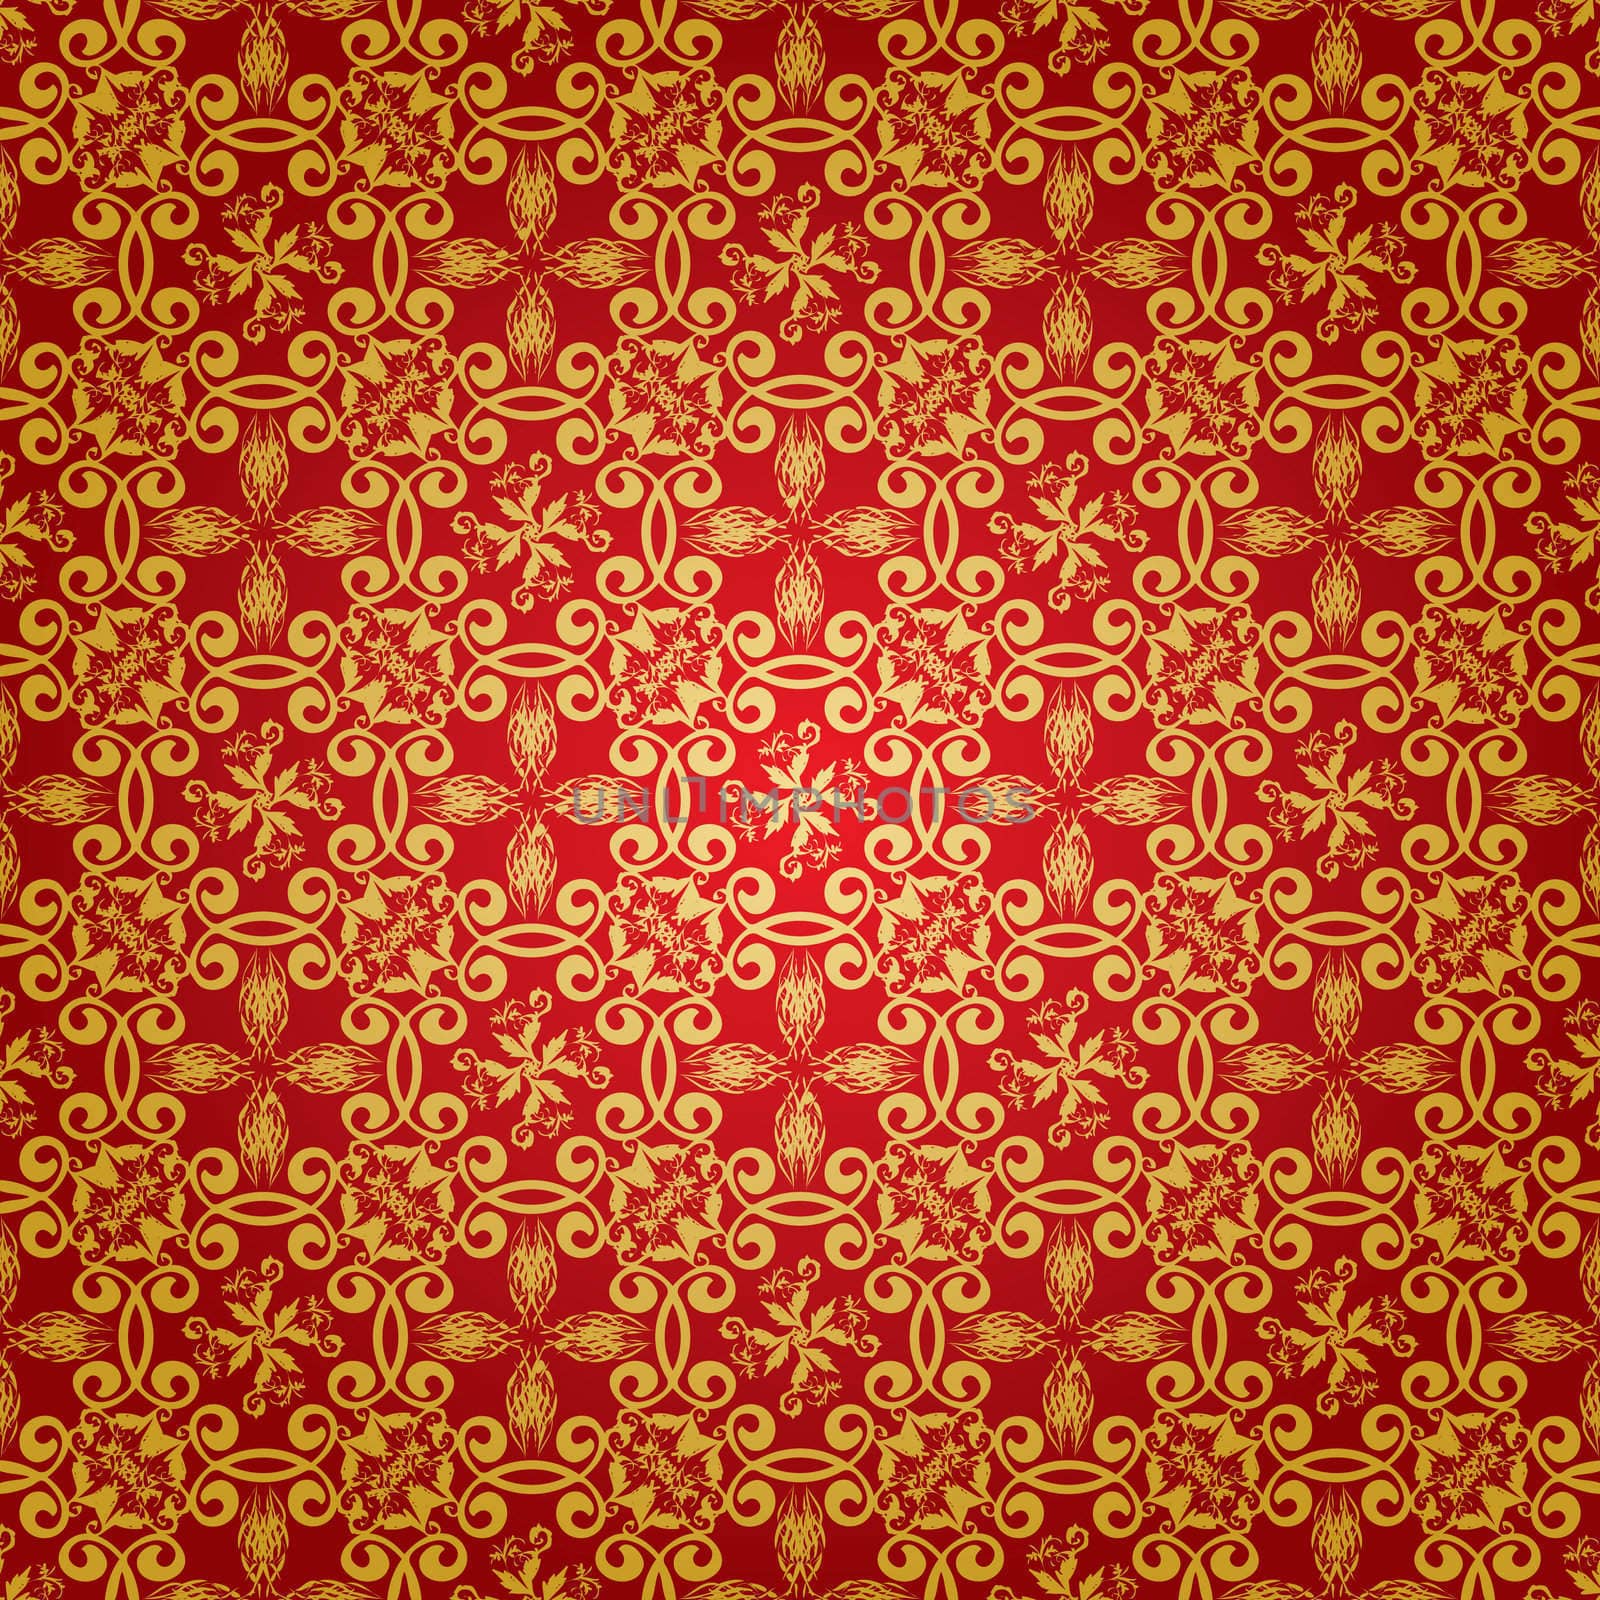 Wallpaper design in red and gold that seamlessly repeats